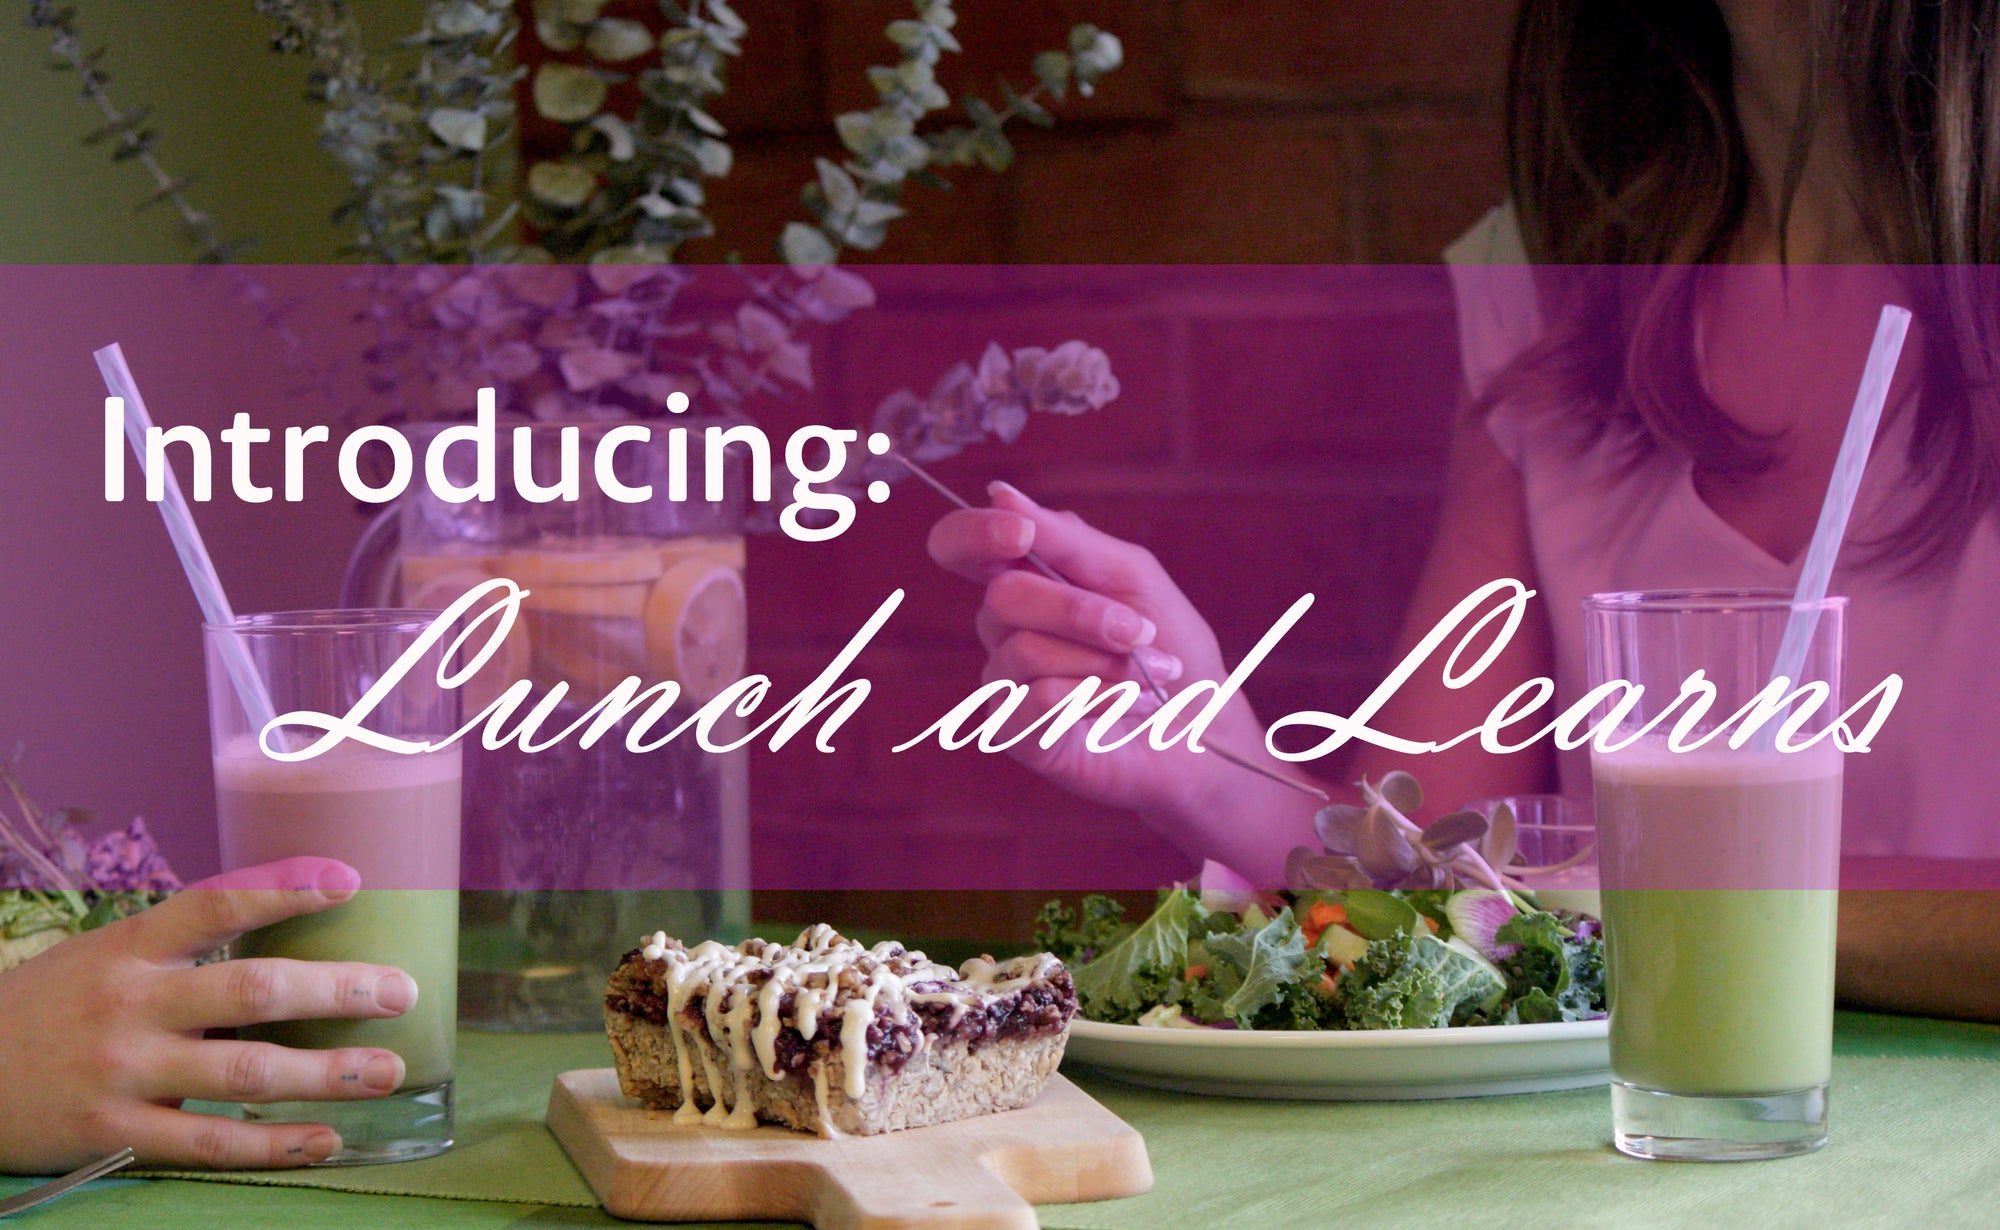 Educate and nourish yourself and your coworkers with our new Lunch and Learn program!